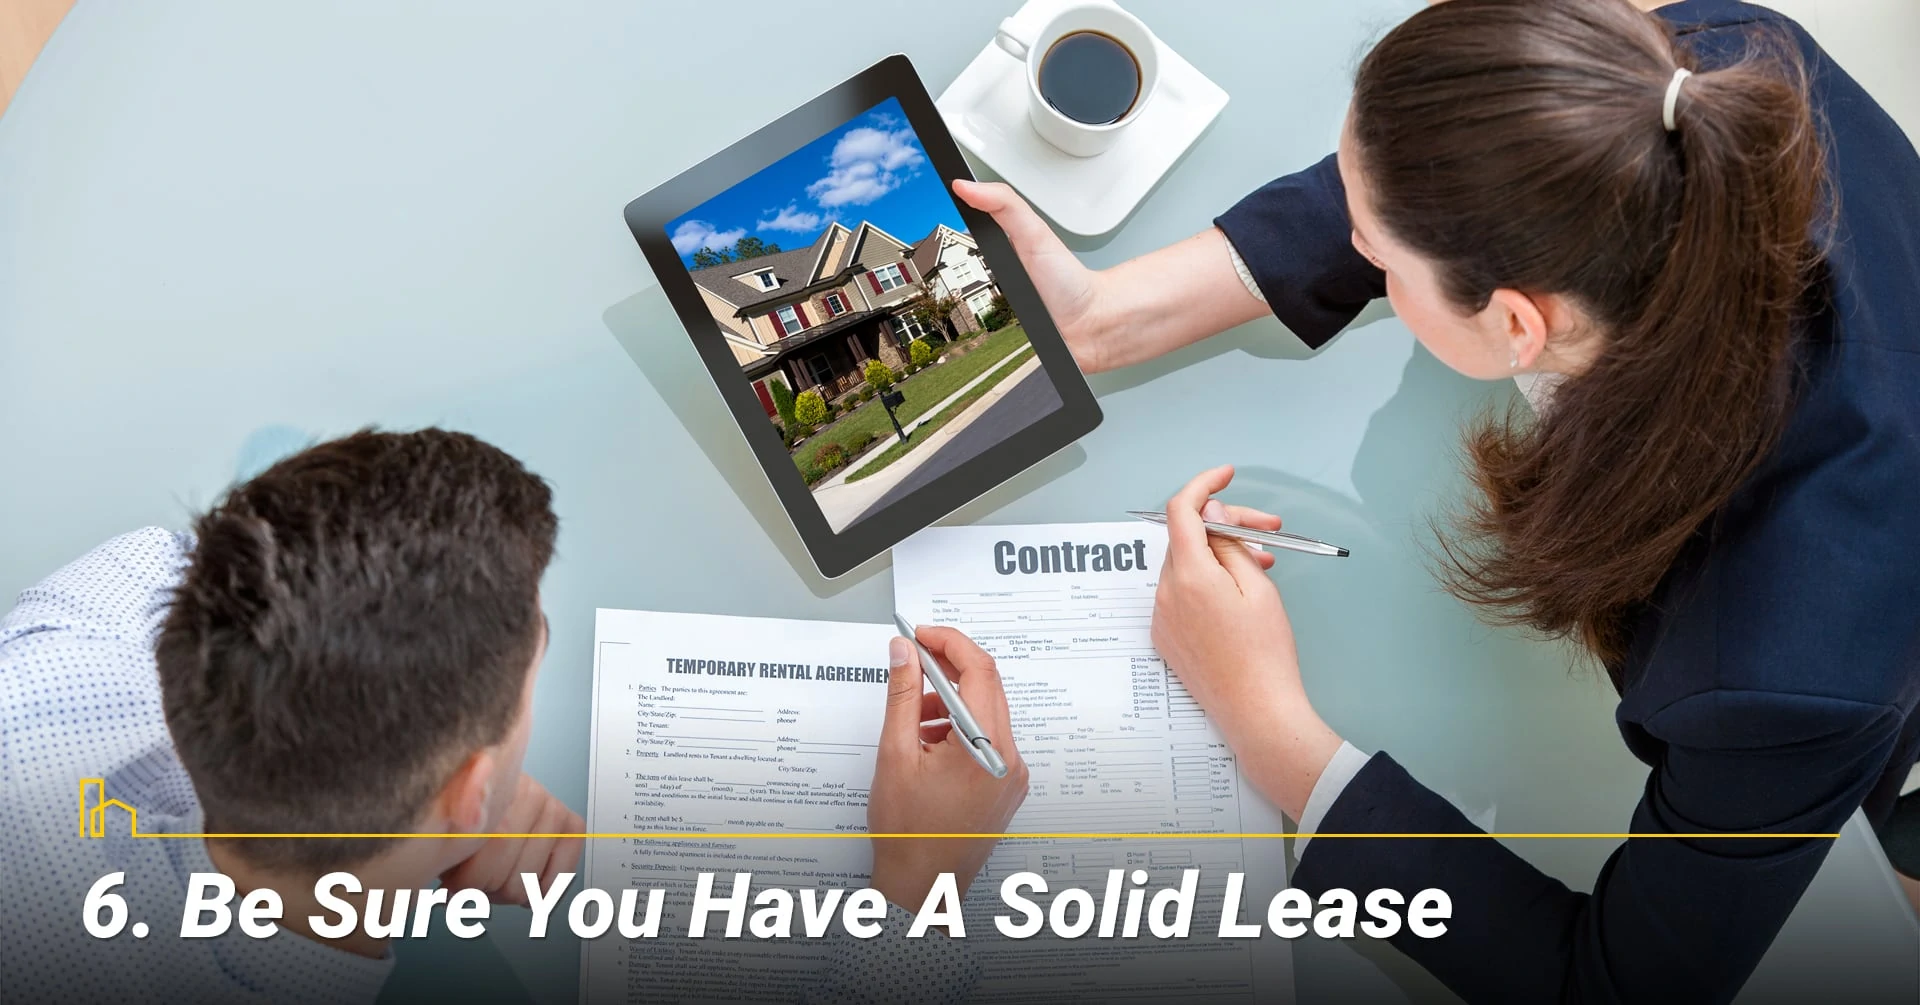 Be Sure You have a Solid Lease, know your lease